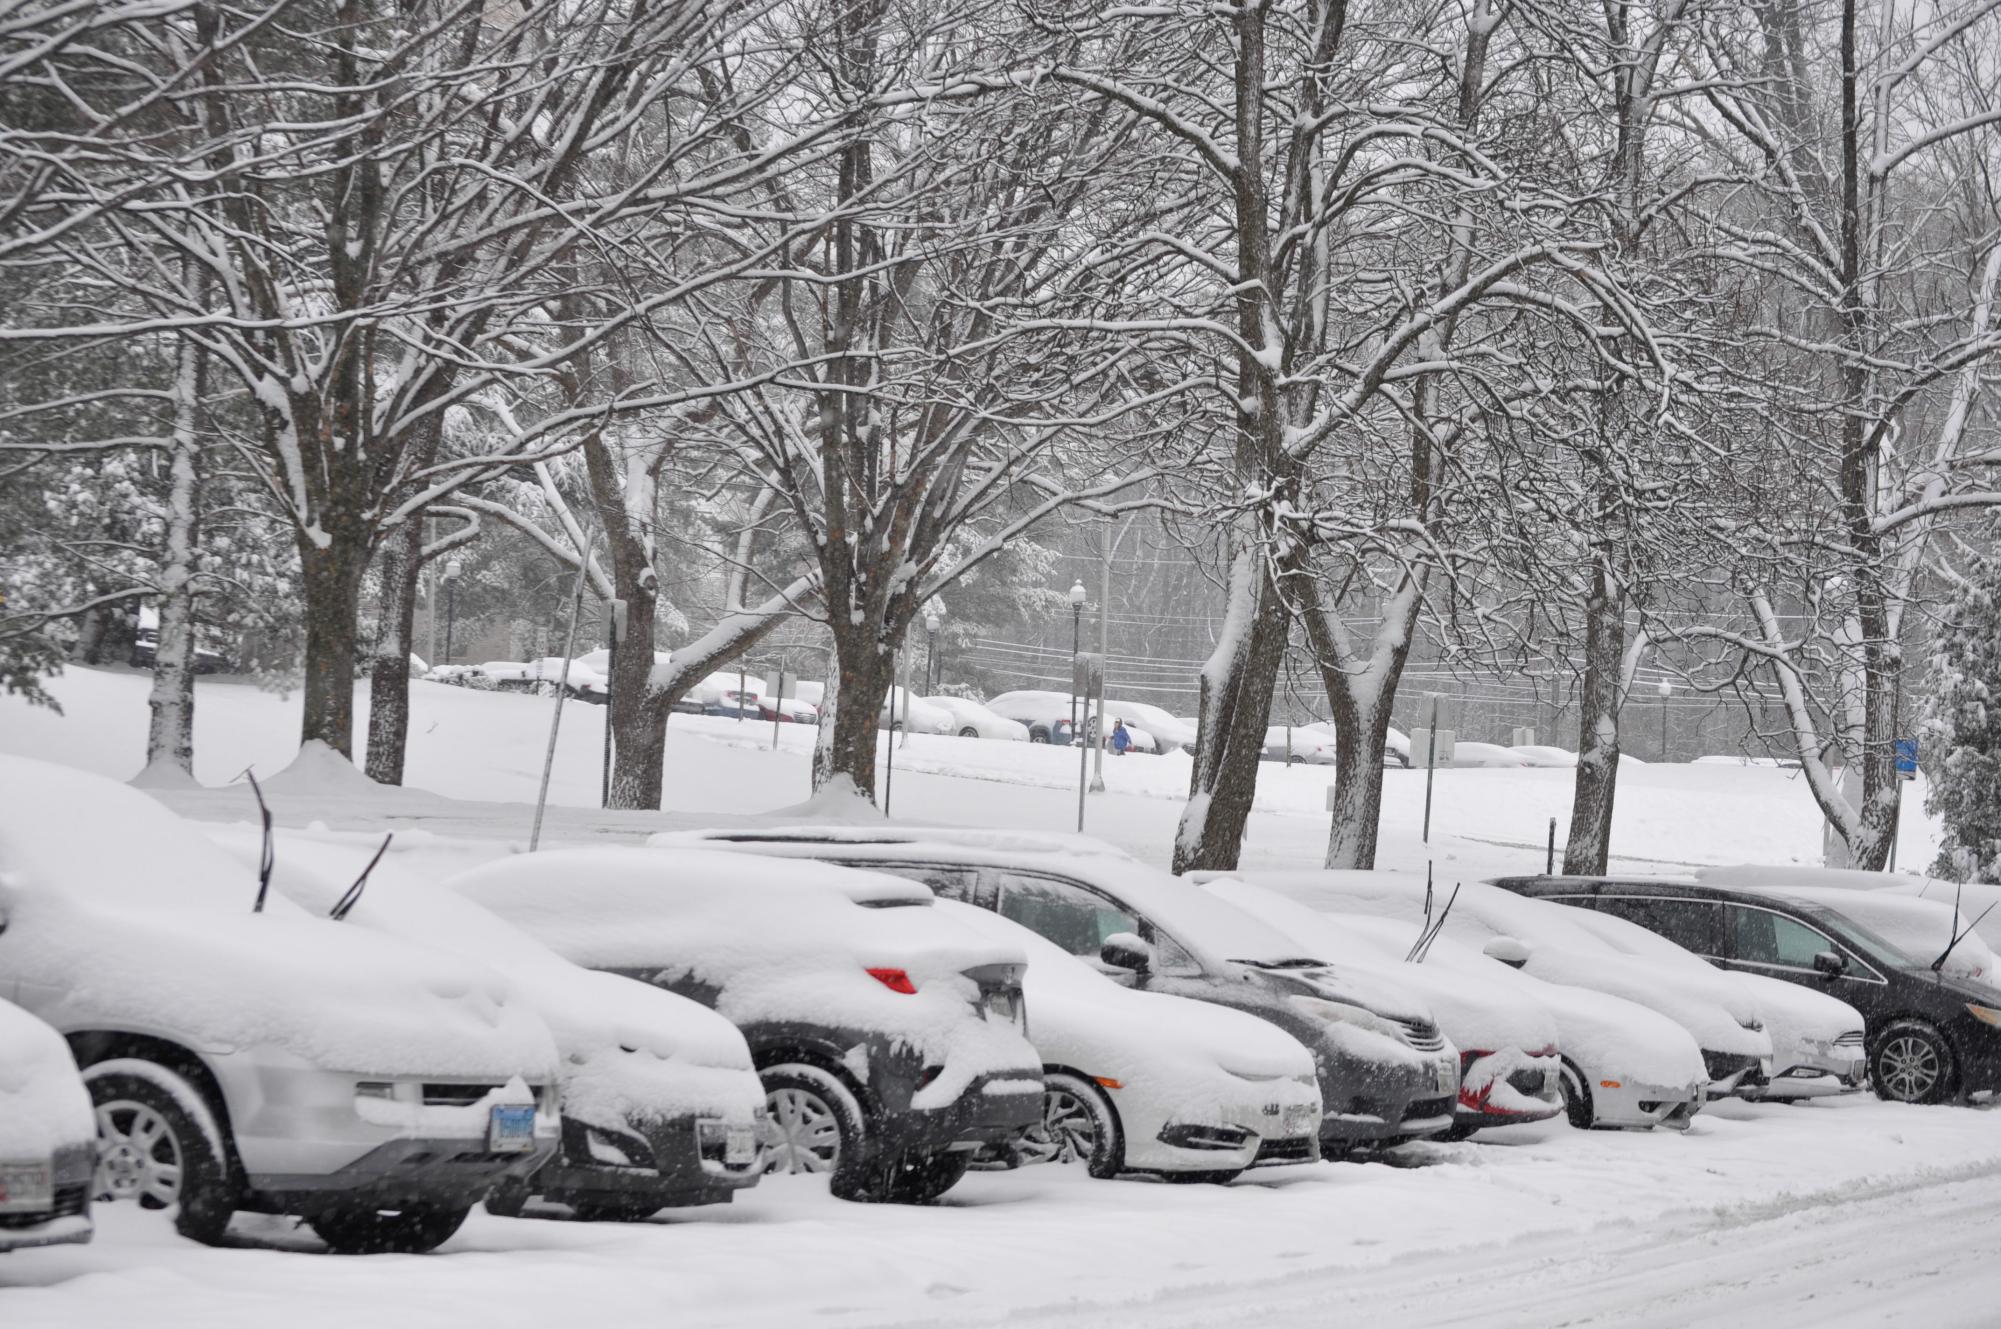 A fleet of cars sit enveloped by snow in a parking lot.